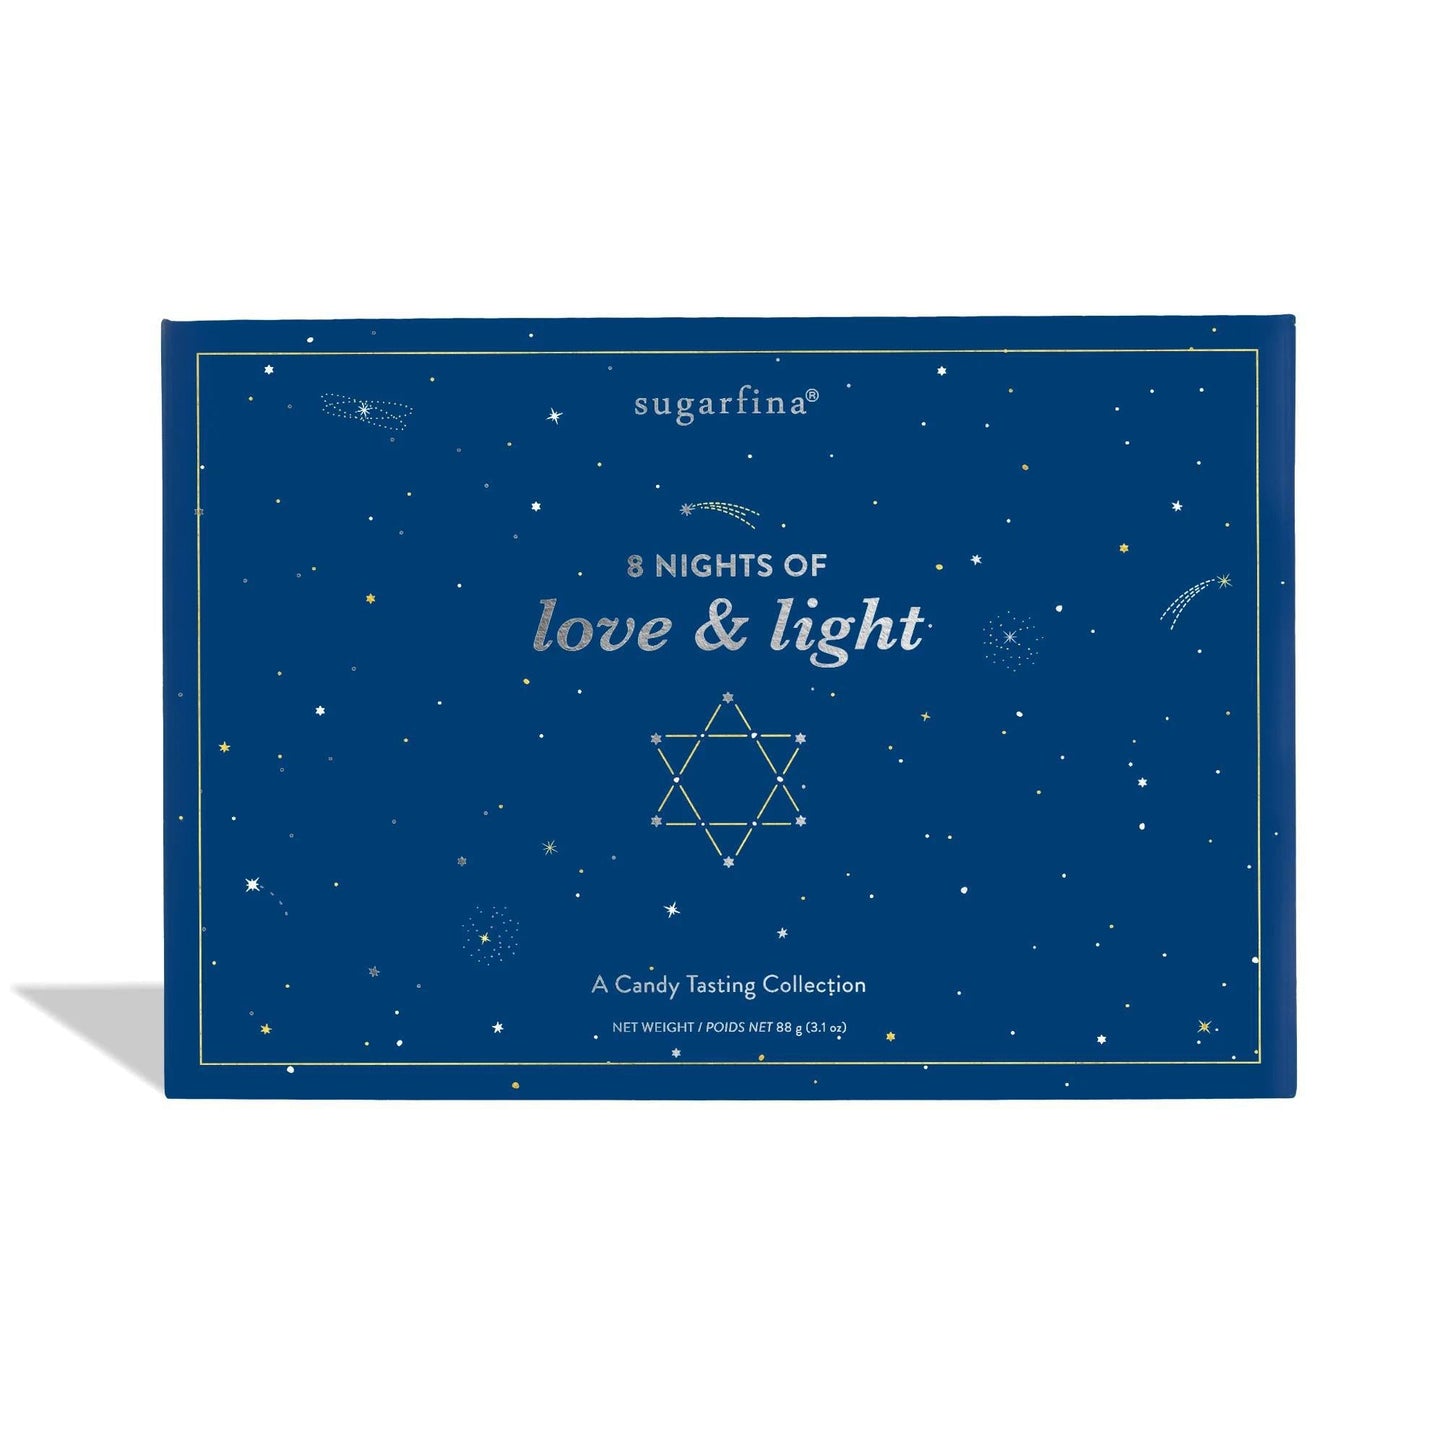 Sugarfina - '8 Nights of Love & Light' Tasting Collection (8CT) - The Epicurean Trader